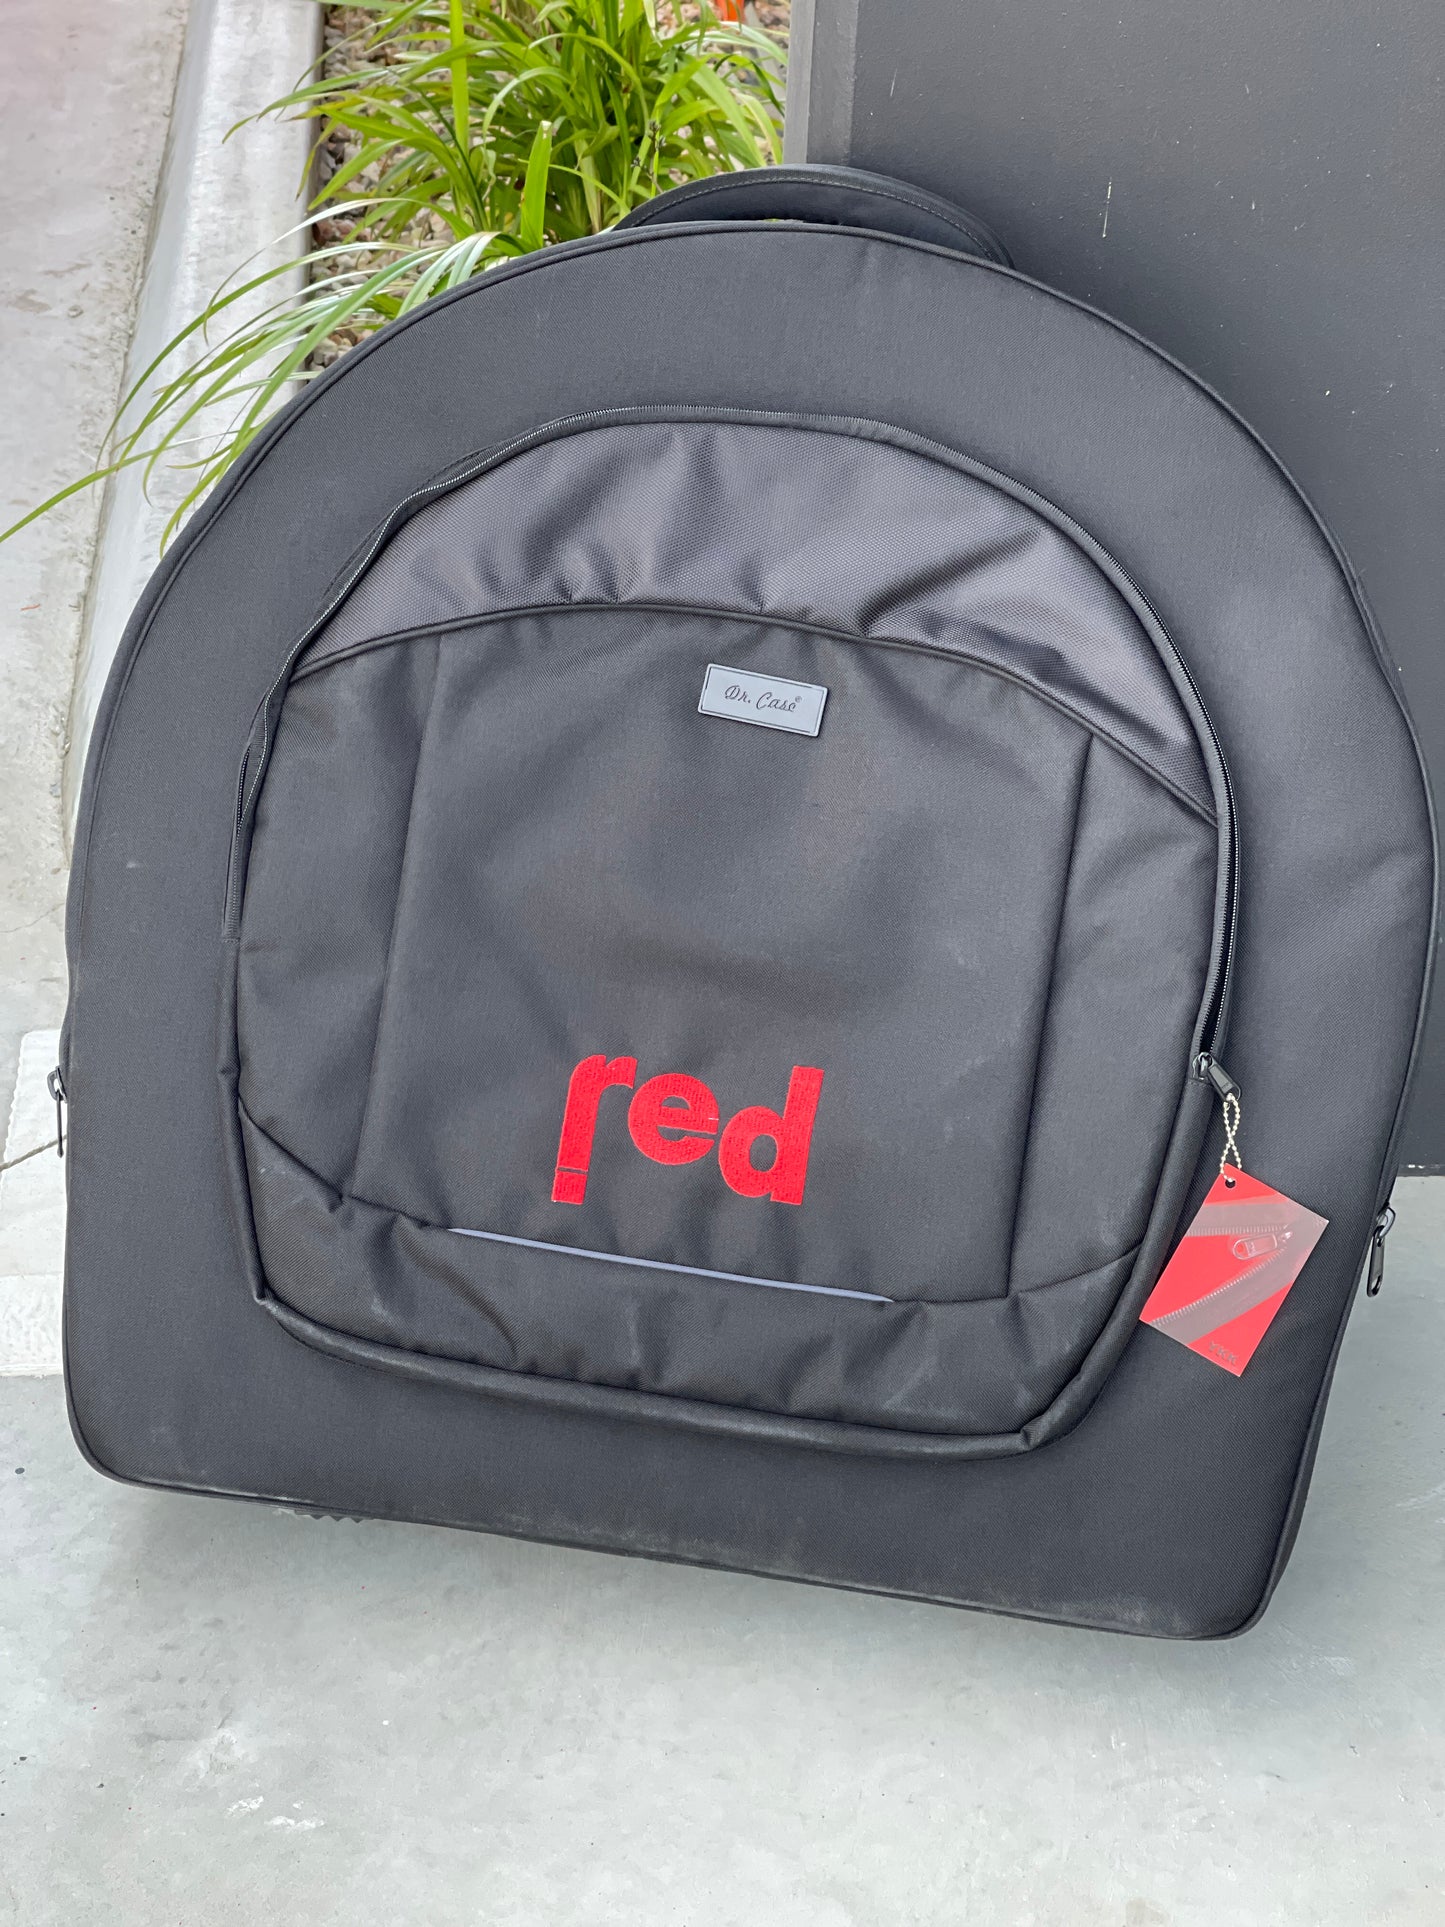 Red Deluxe Cymbal Bag / Case 22", 24" or 26"